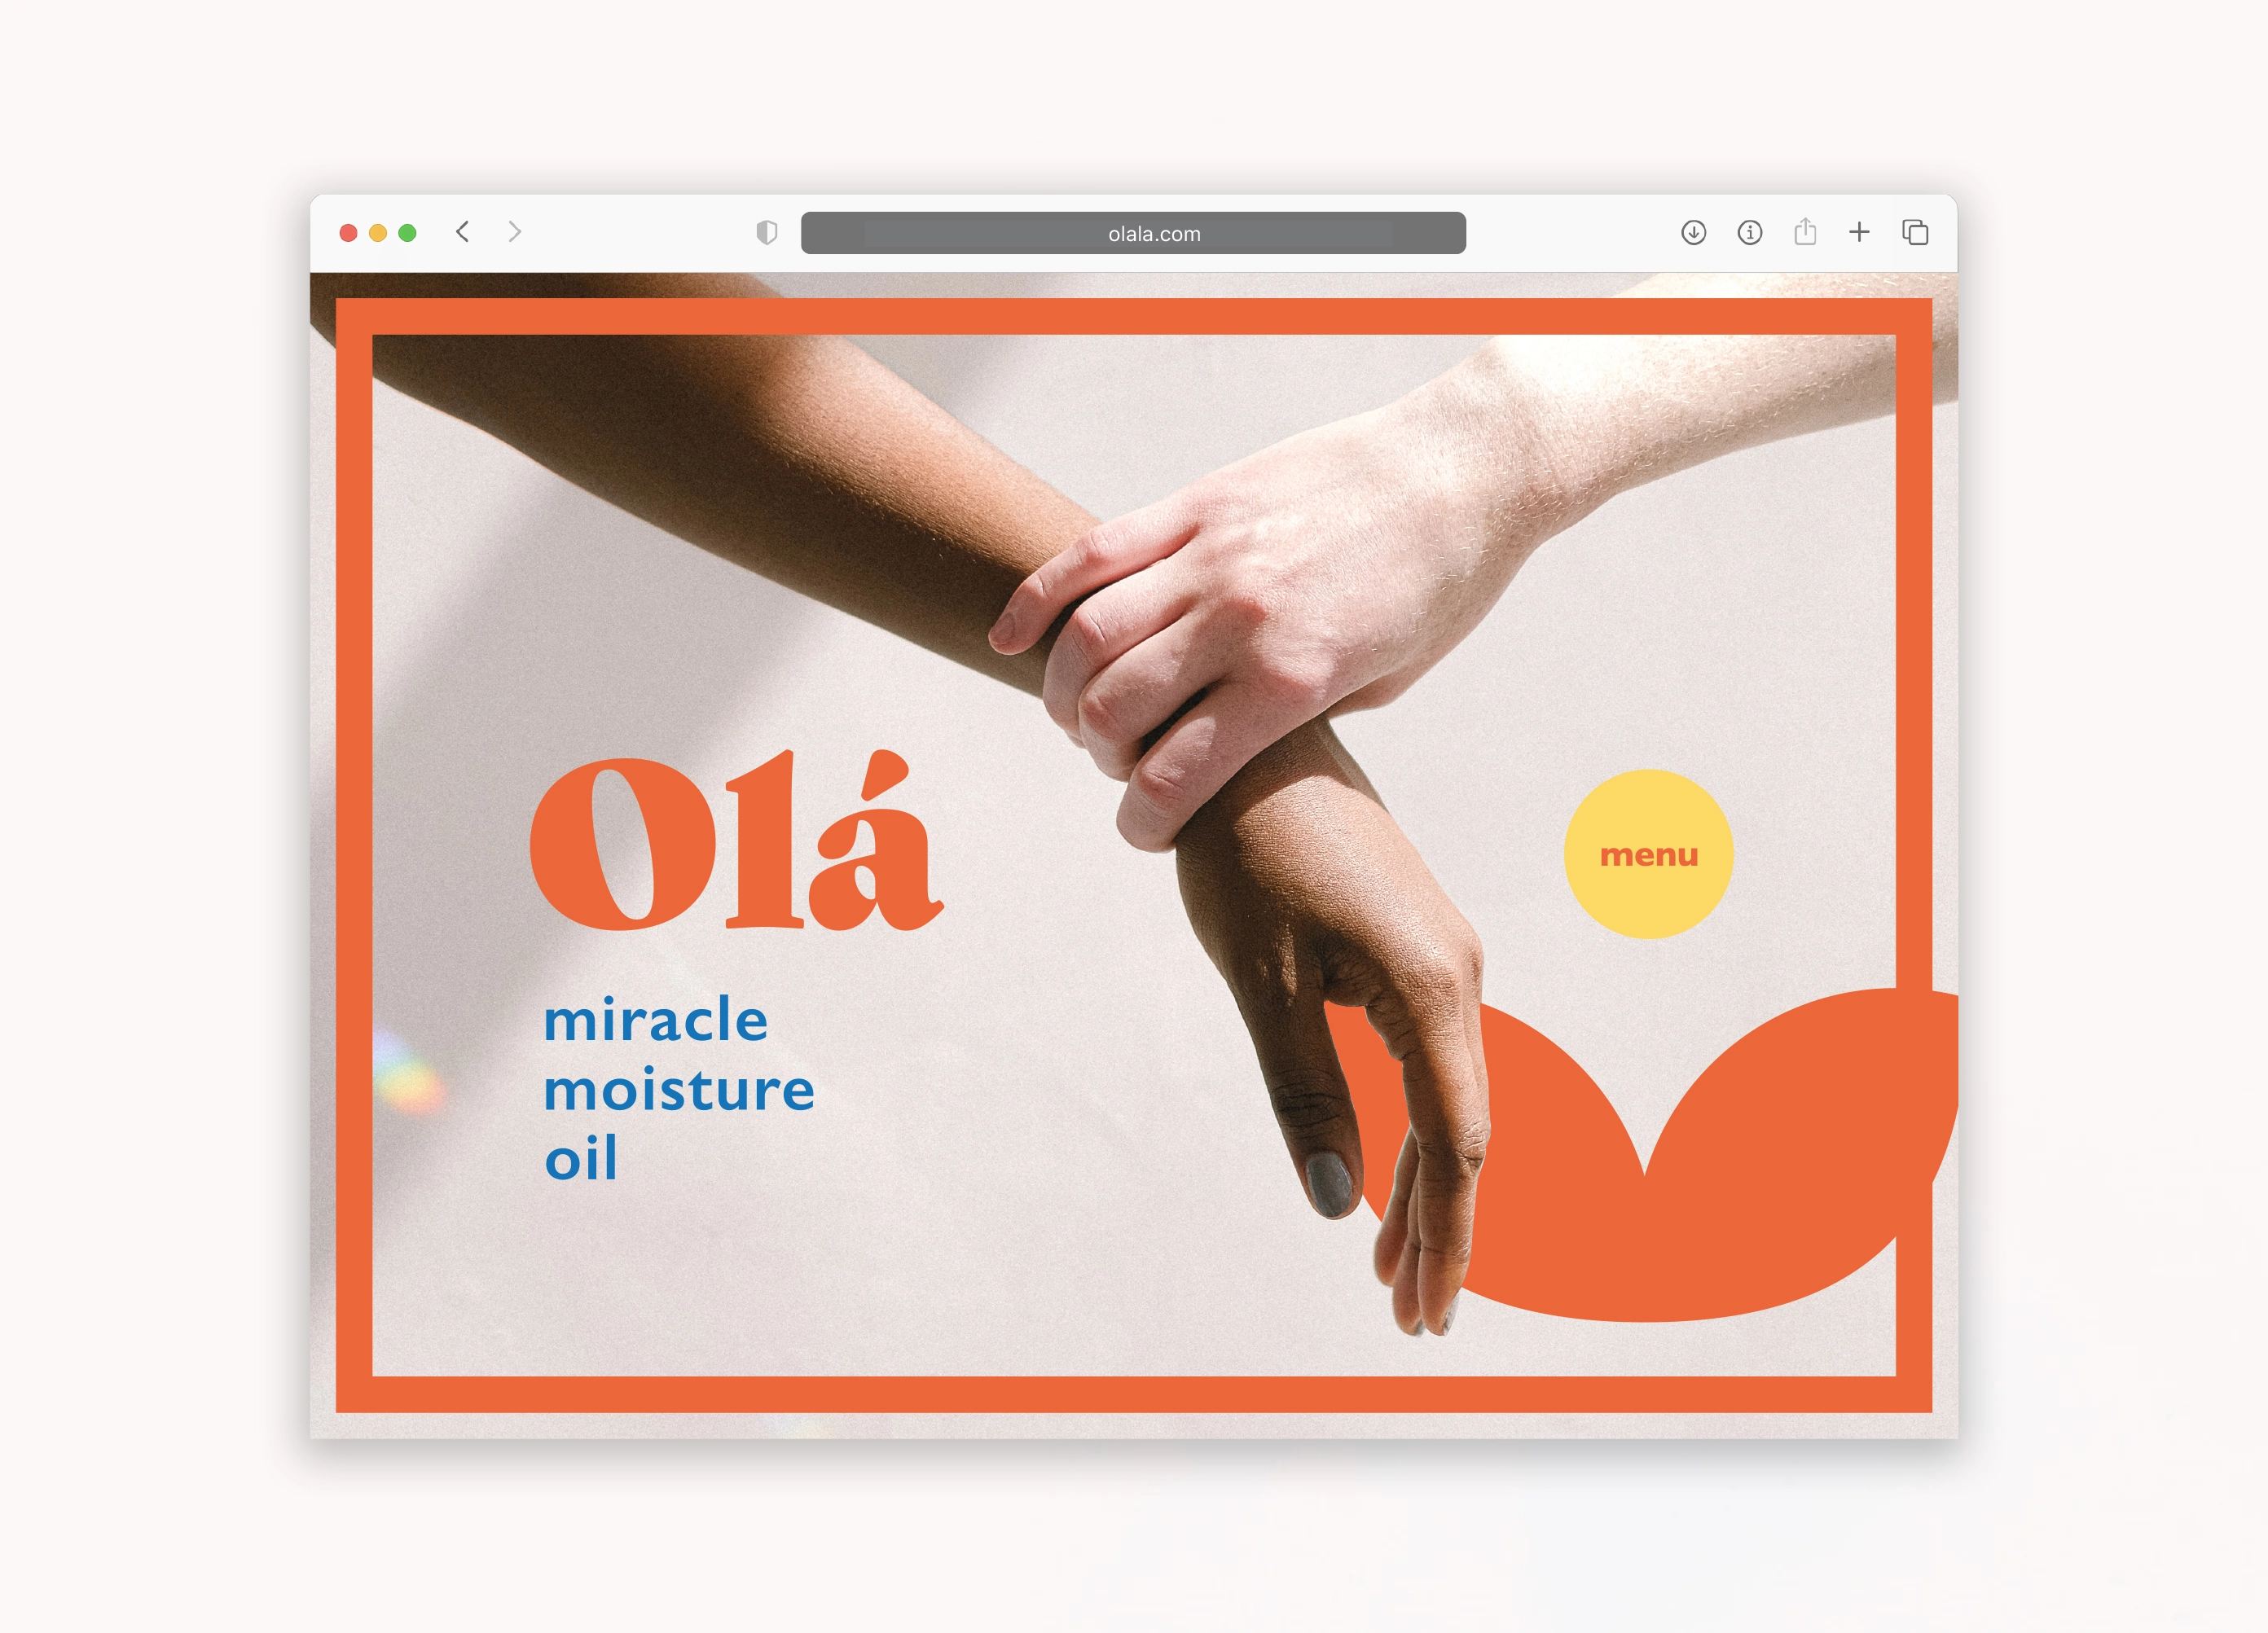 a web browser shows the homepage for the Ola Oil website